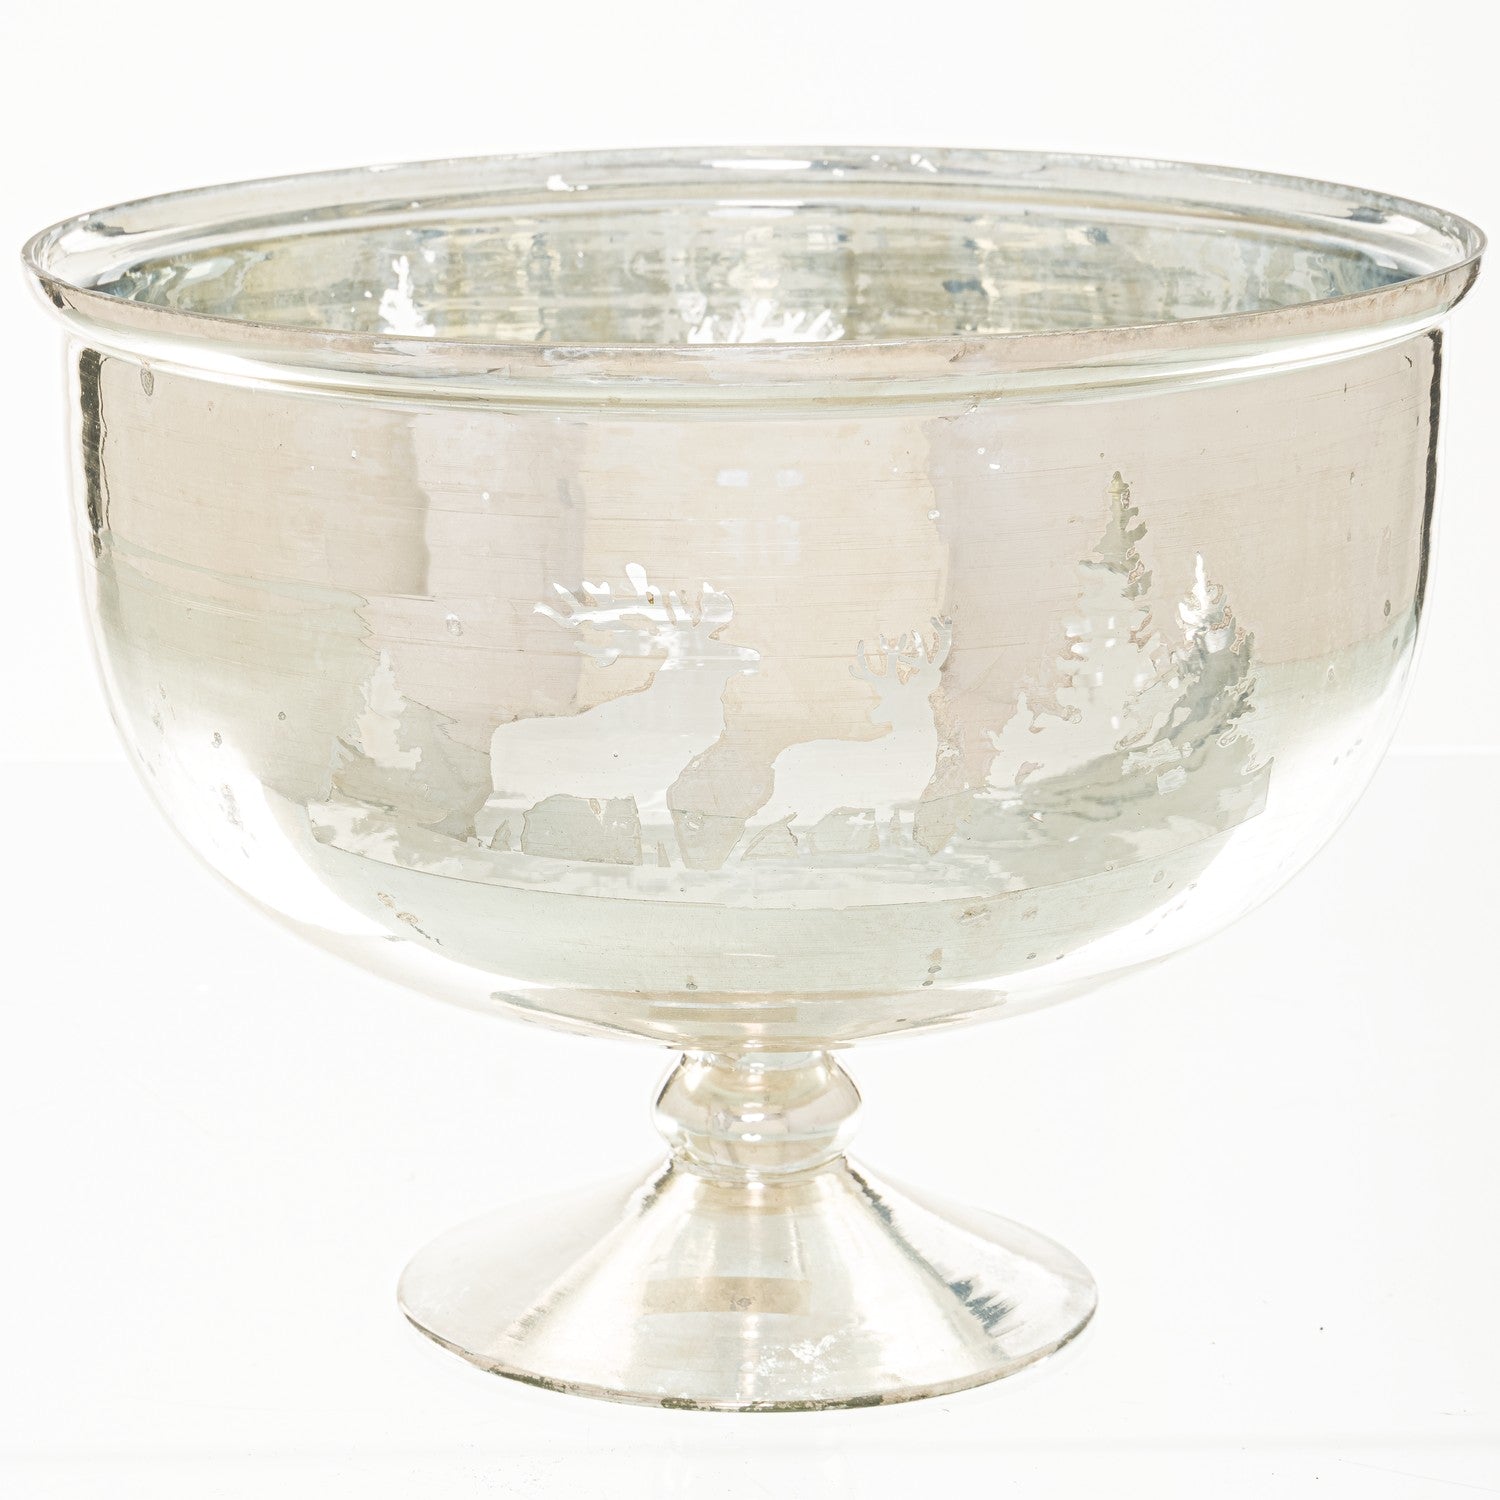 The Noel Collection Silver Forest Scene Footed Bowl